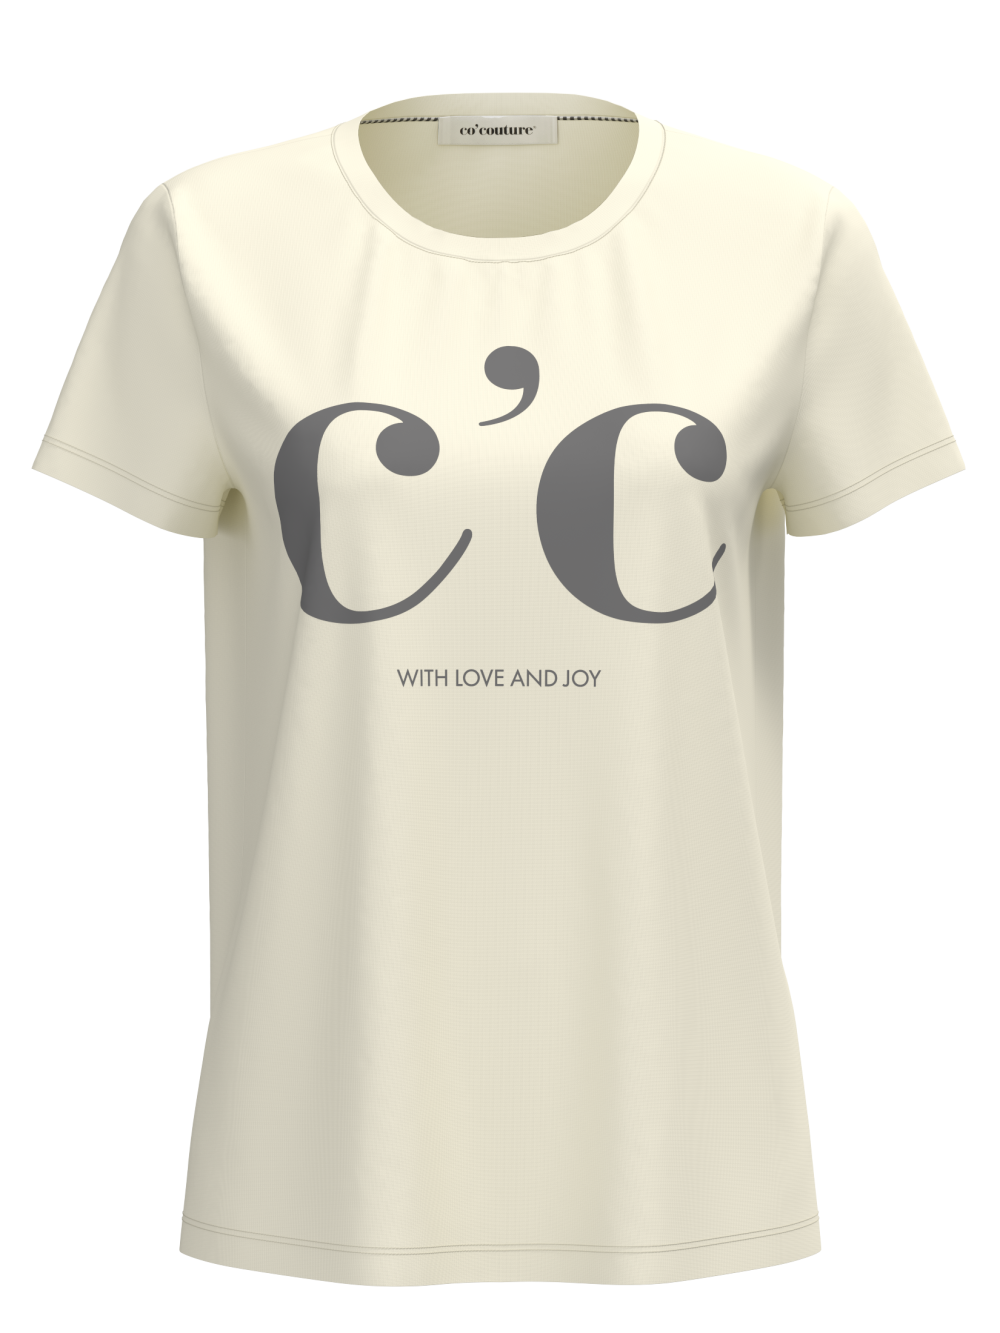 Cc Clean T-shirt fra Co'Couture